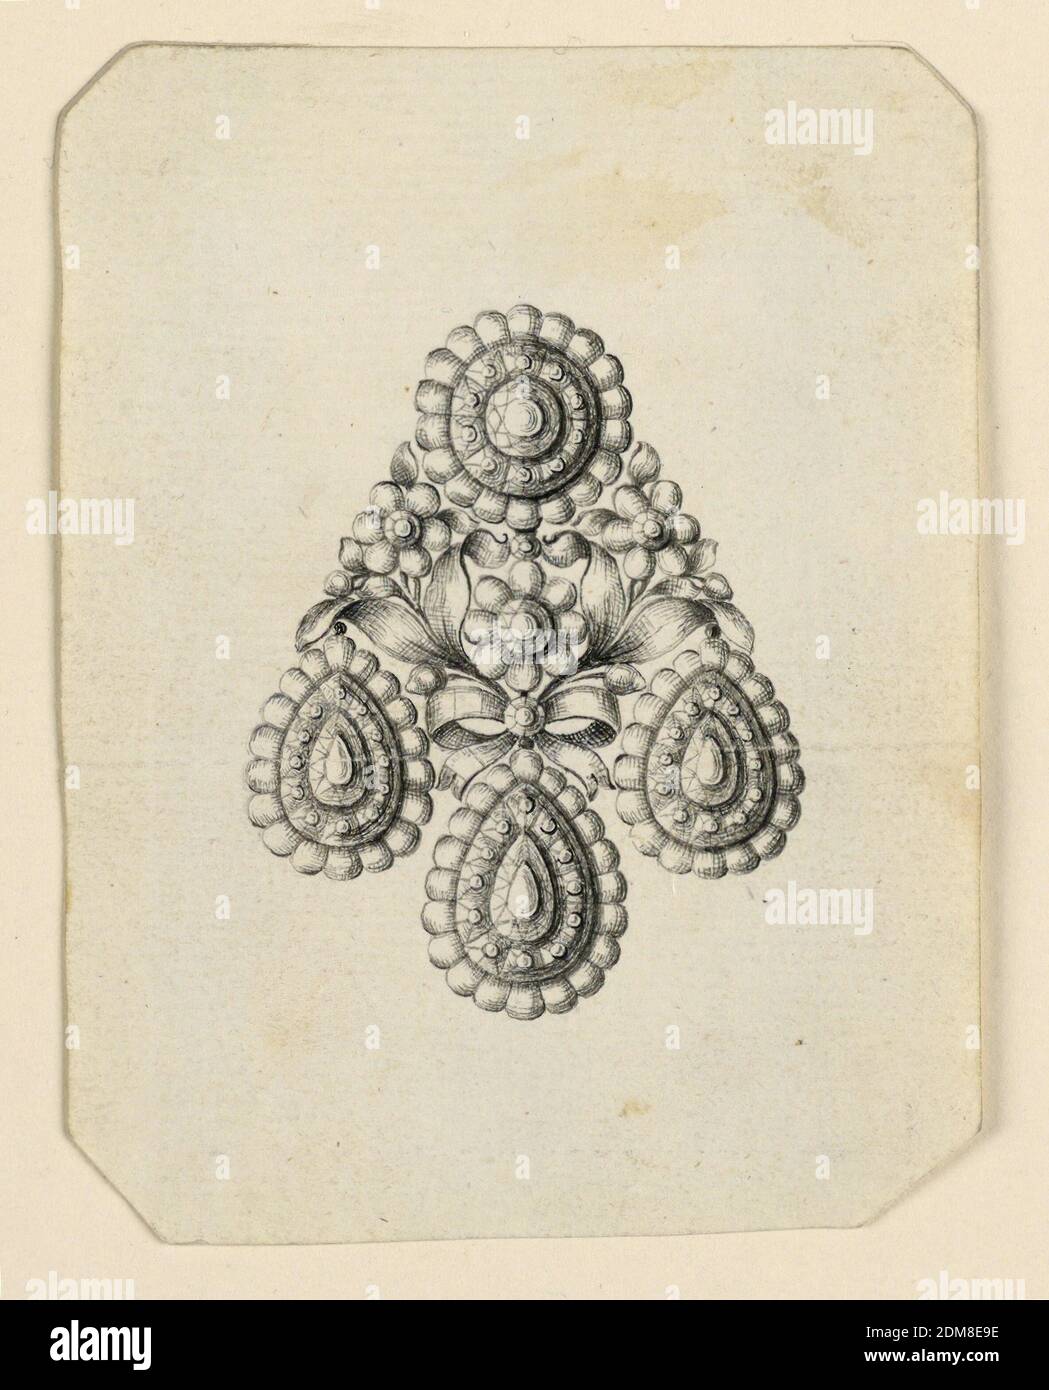 Design for an Earring, Pen and black ink, brush and gray watercolor on off-white laid paper, Jewelry design for an earring, the usual scheme, a disk above and three drops below. In the center two flower stems, fastened by a knot, in the middle a blossom. Bevelled corners., Italy, late 18th century, jewelry, Drawing Stock Photo